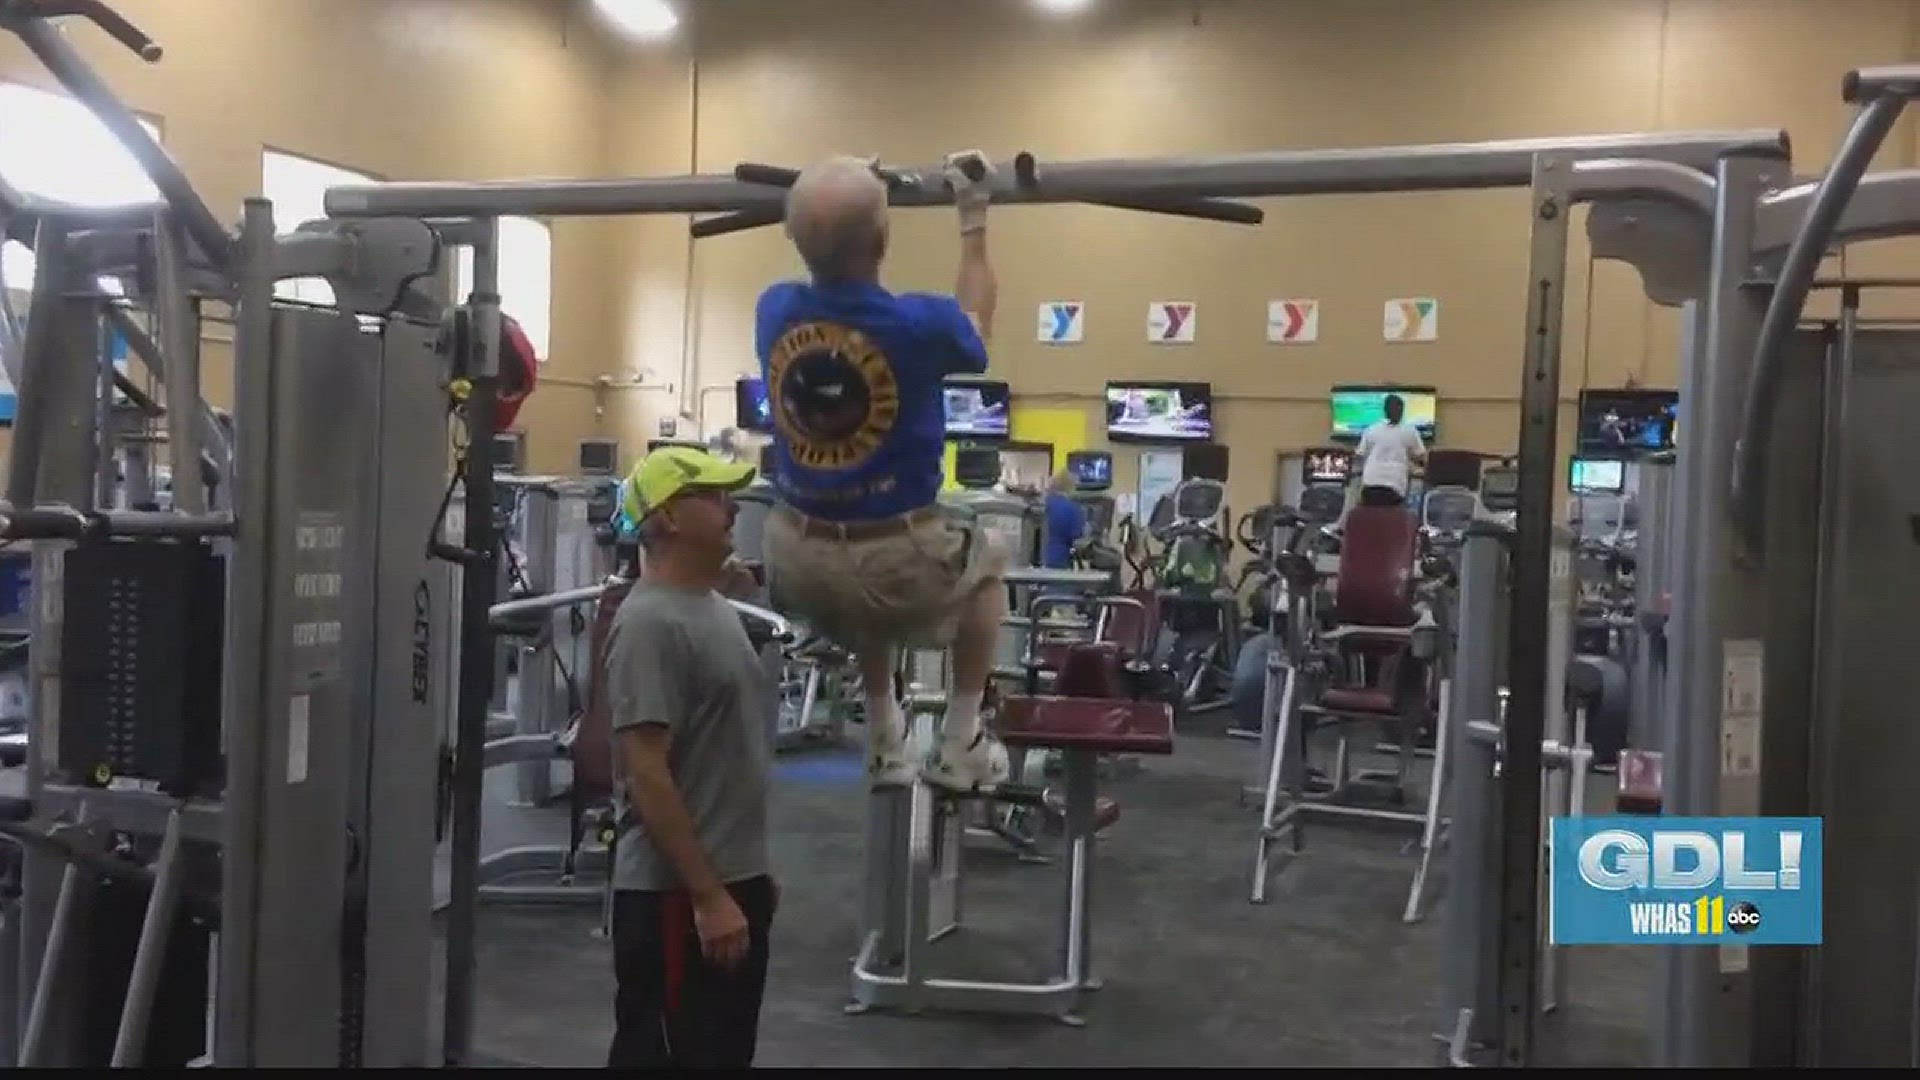 Dan DiSalvo doesn't let his age stop him from putting in work at the gym.